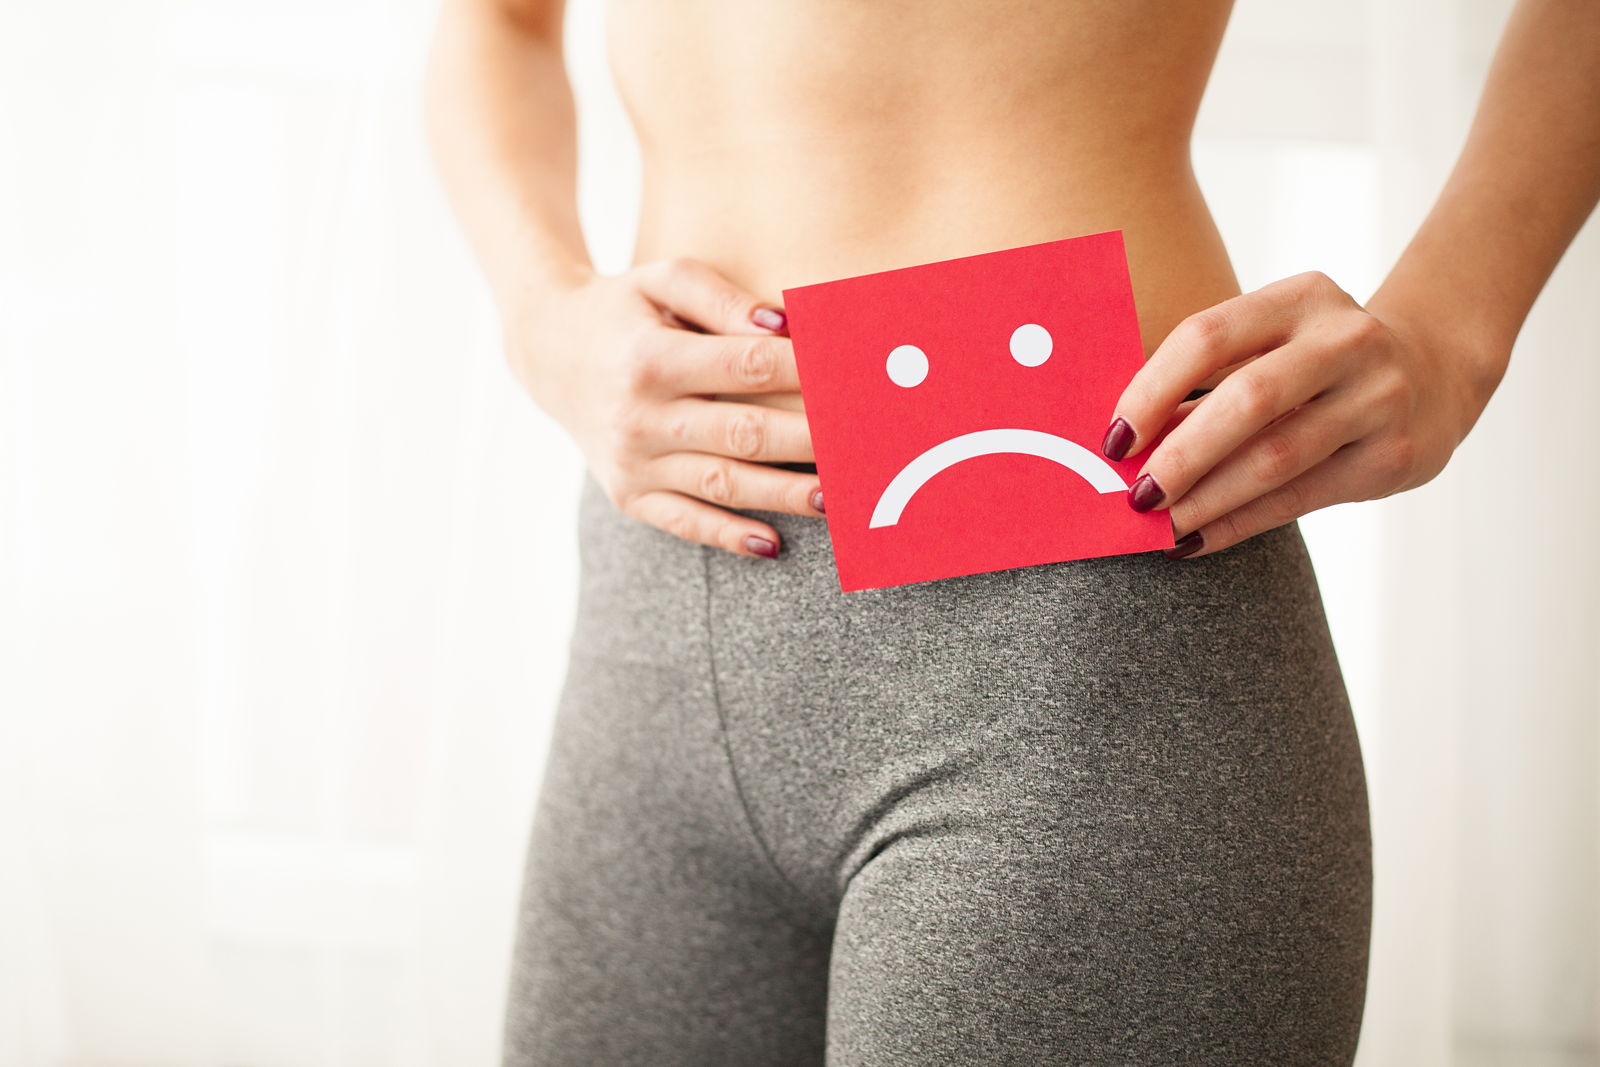 vaginal-urinary-infection-problems-concept-young-woman-holds-paper-with-sad-smile-crotch